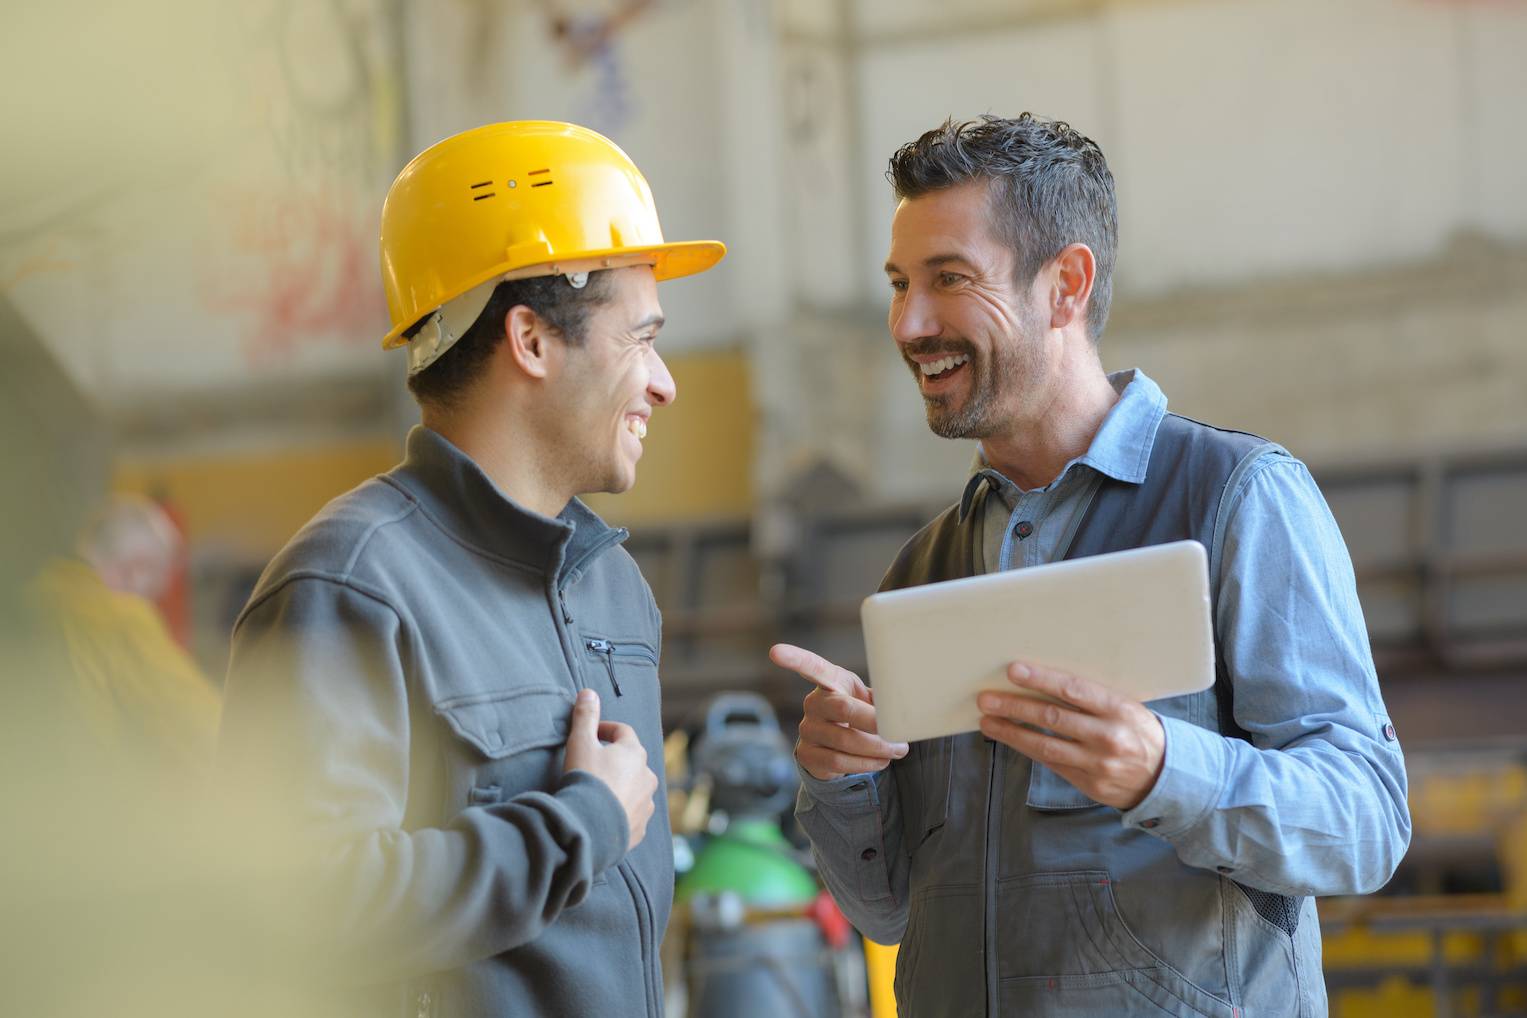 Two workers standing in a warehouse. The one on the left wears a yellow hard hat while the one on the right holds a tablet showing the screen to the other.